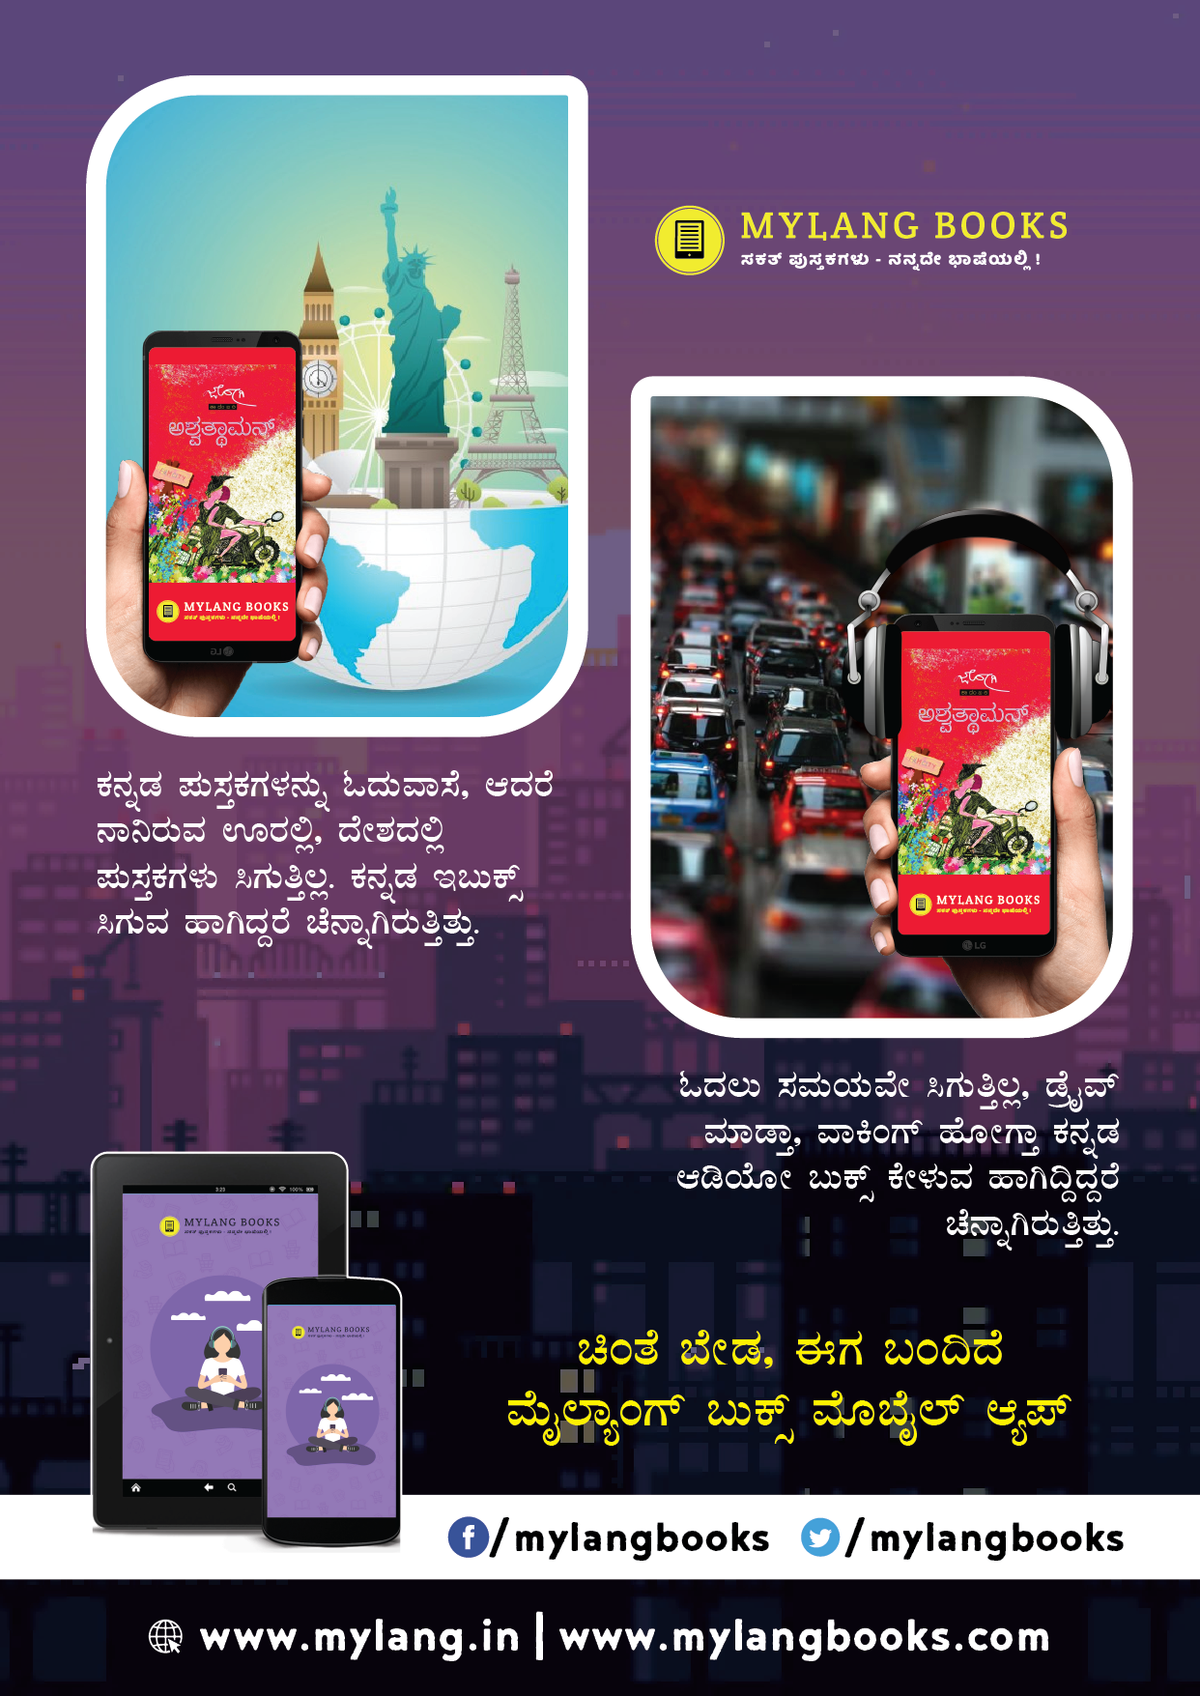 Read Kannada books on your mobile phone using MyLang Books. Enjoy thousands of eBooks and audiobooks